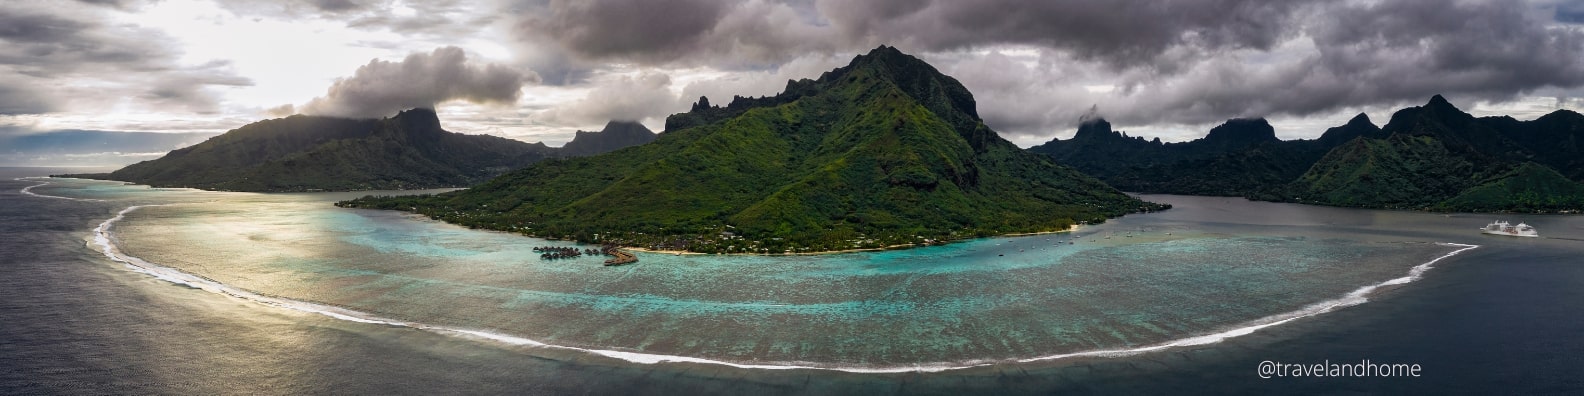 Moorea snorkeling day tours holiday French Polynesia is Oceanias Leading Destination travel and home travelandhome min